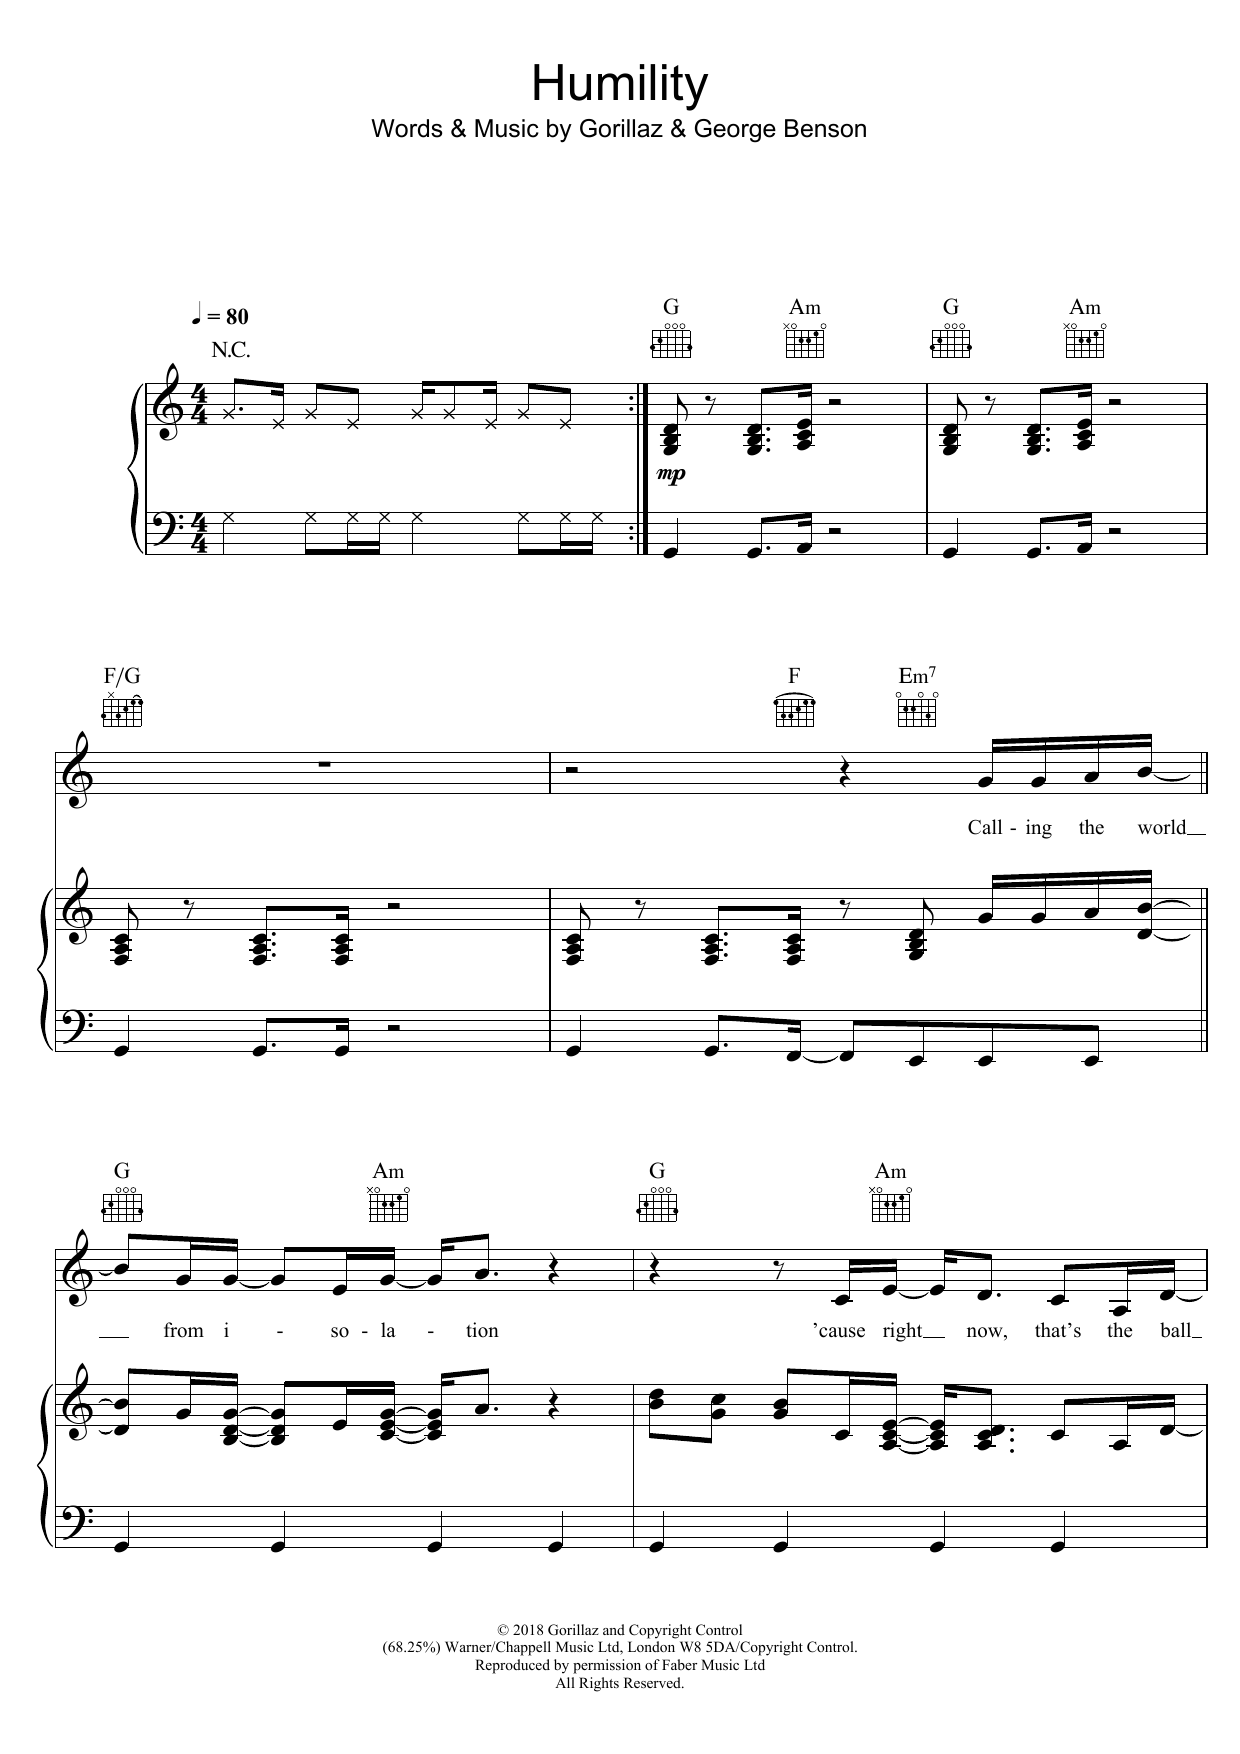 Download Gorillaz Humility (featuring George Benson) Sheet Music